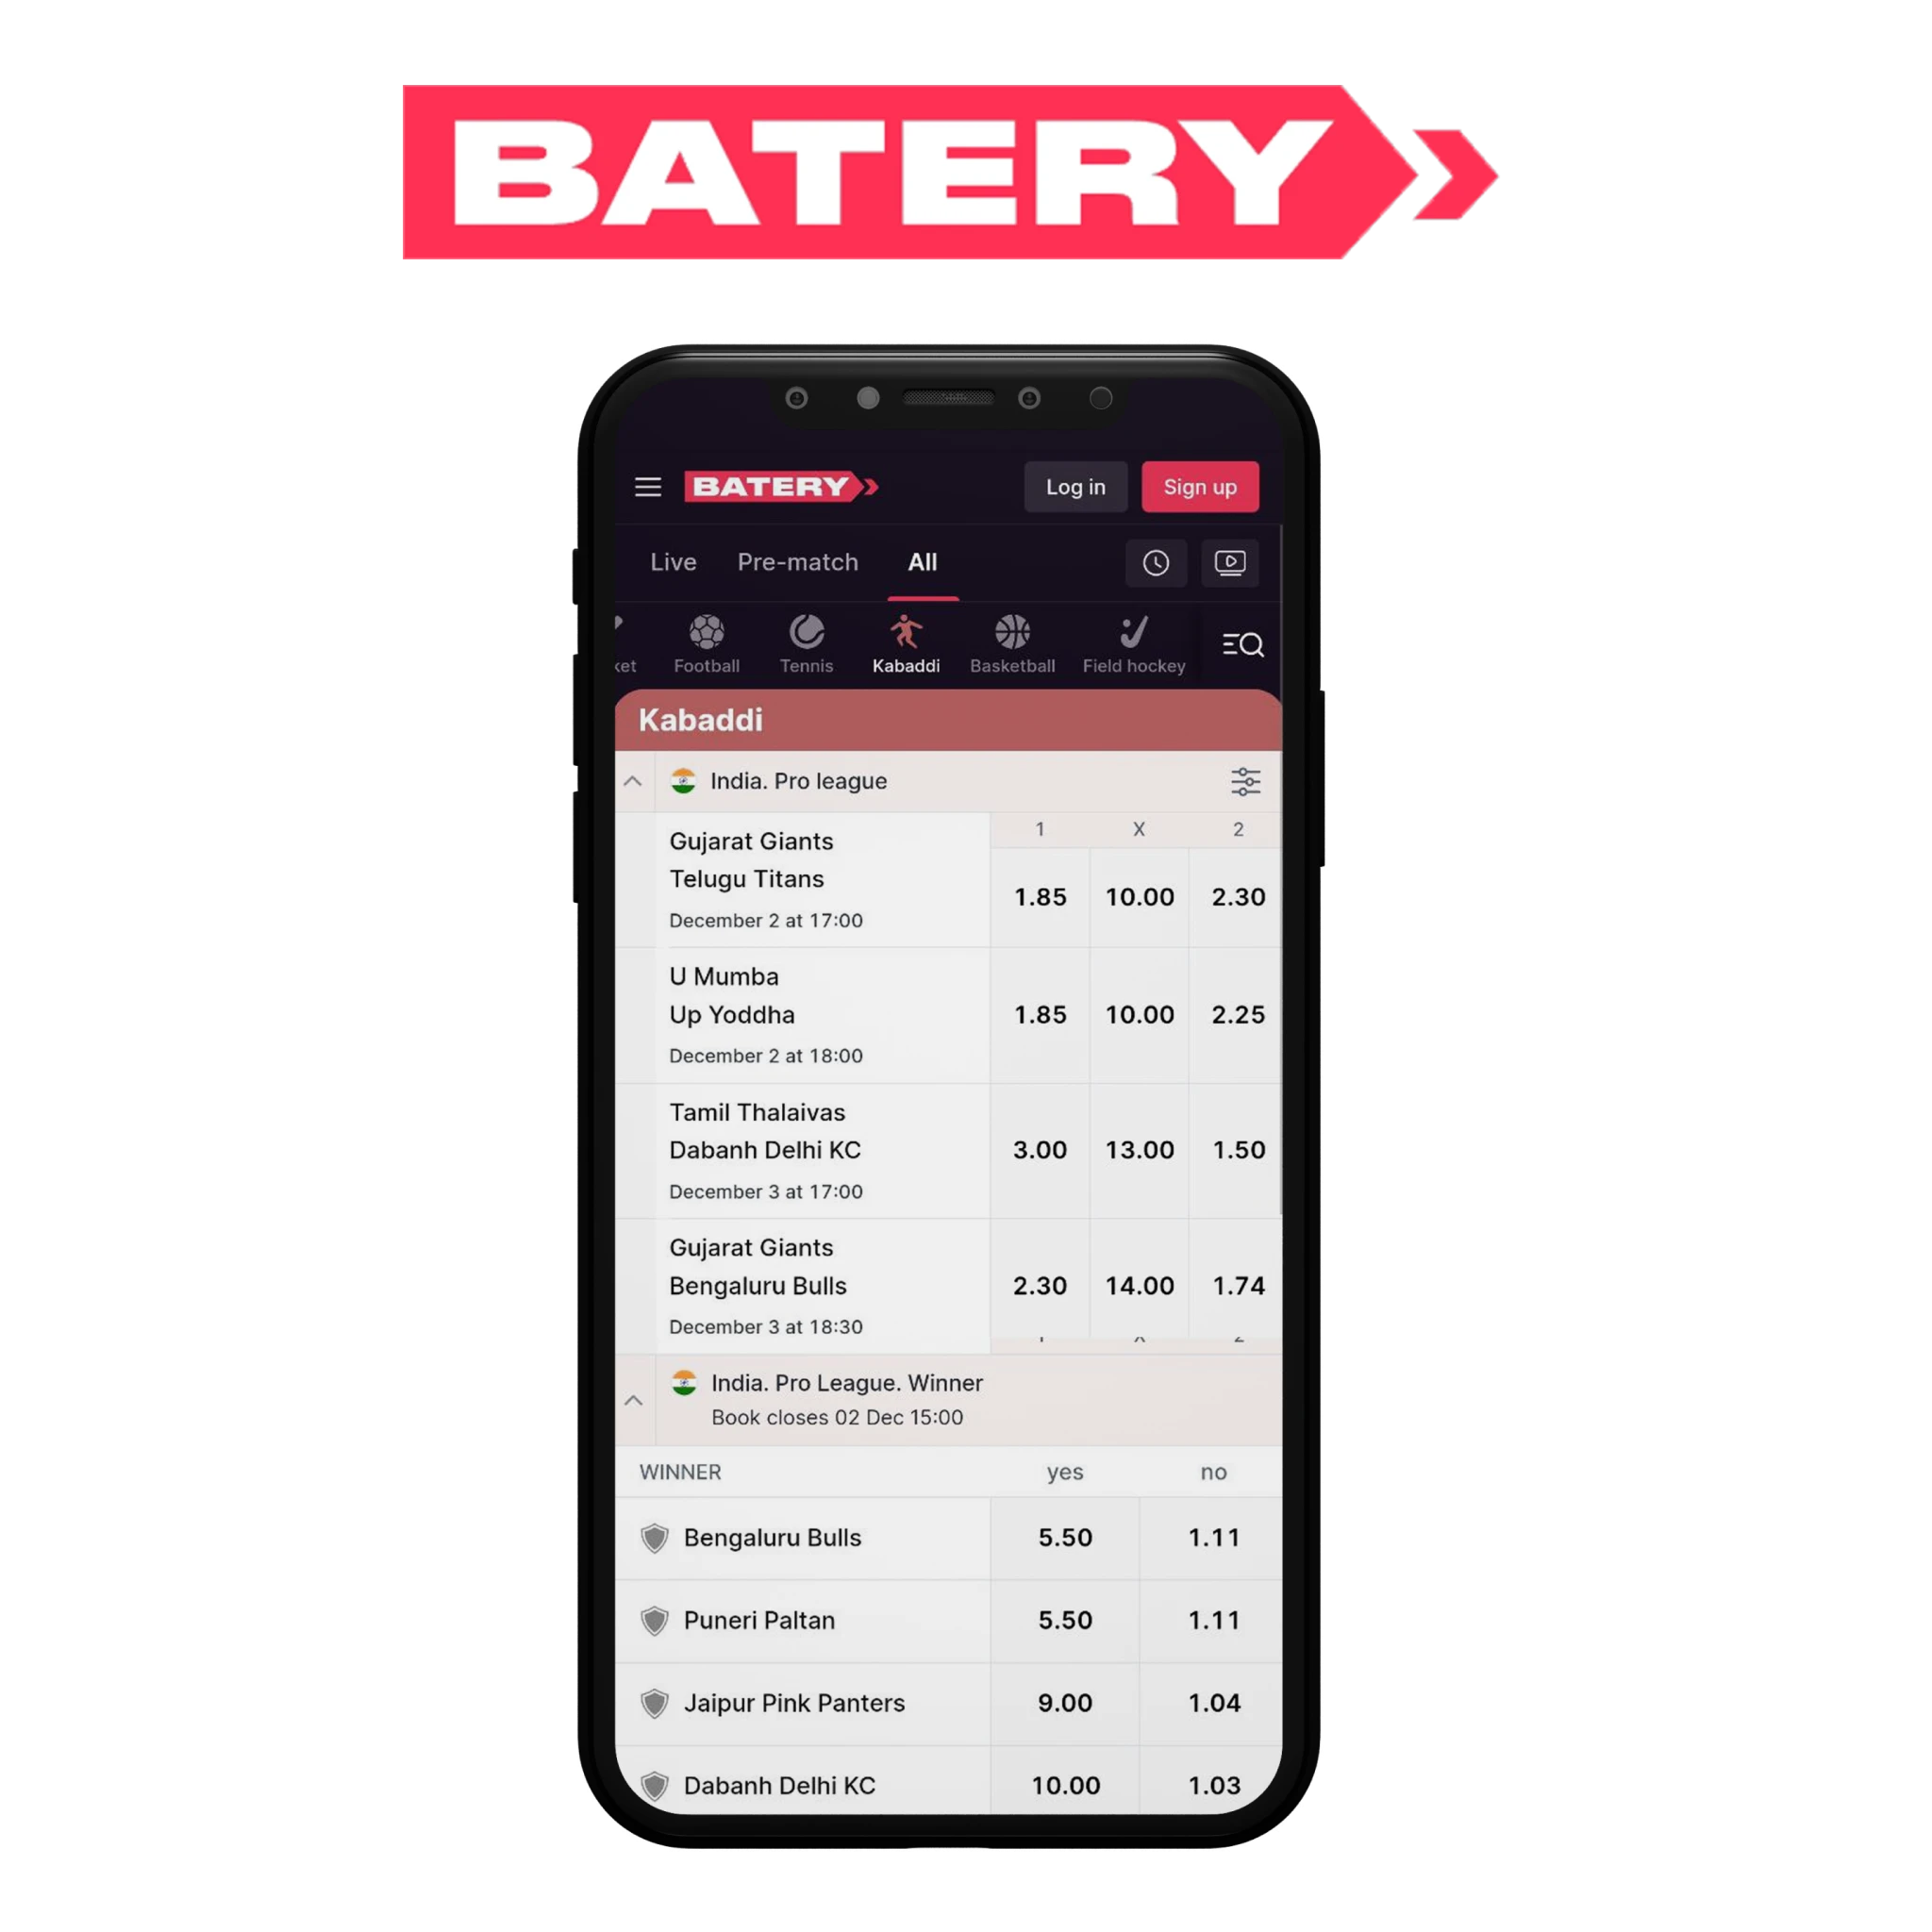 Batery application is easy to use and place bets on kabaddi.